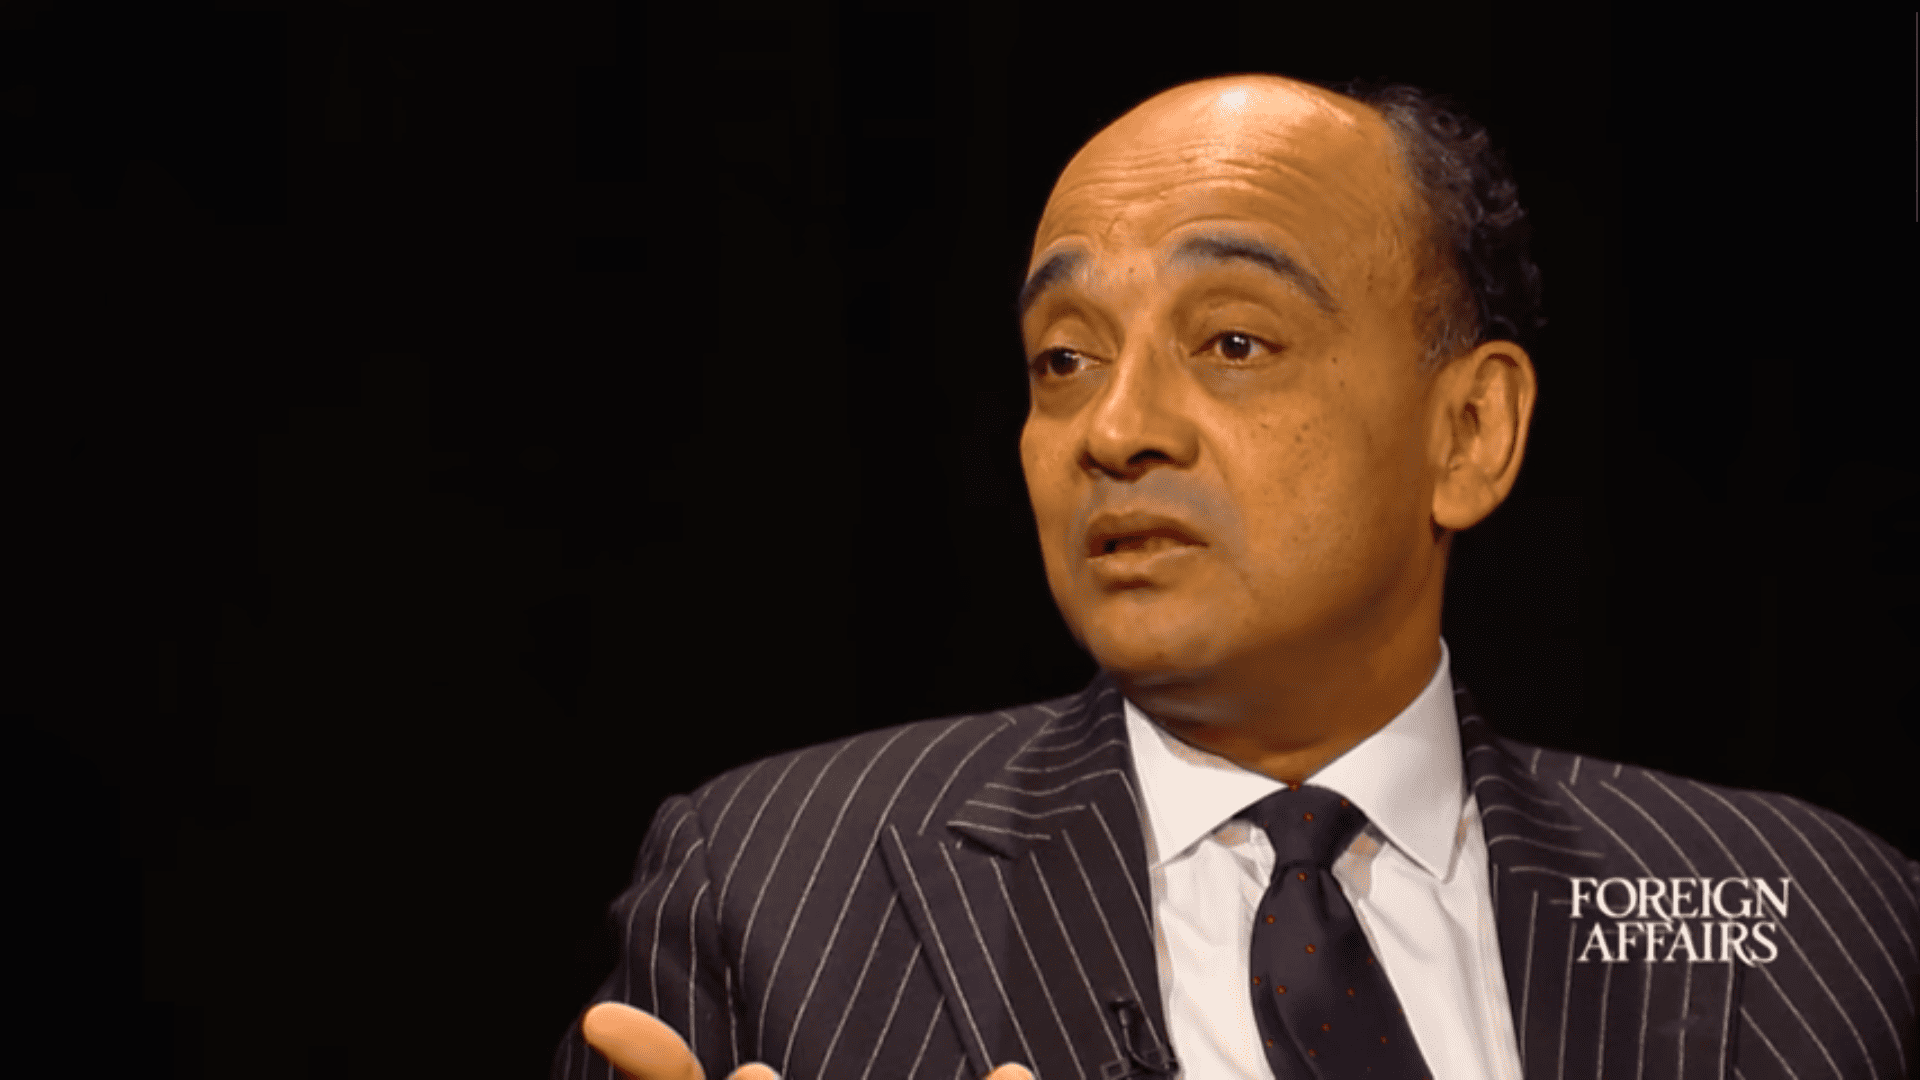 Kwame Anthony Appiah, a dark-skinned man in a suit, speaking with an interviewer.